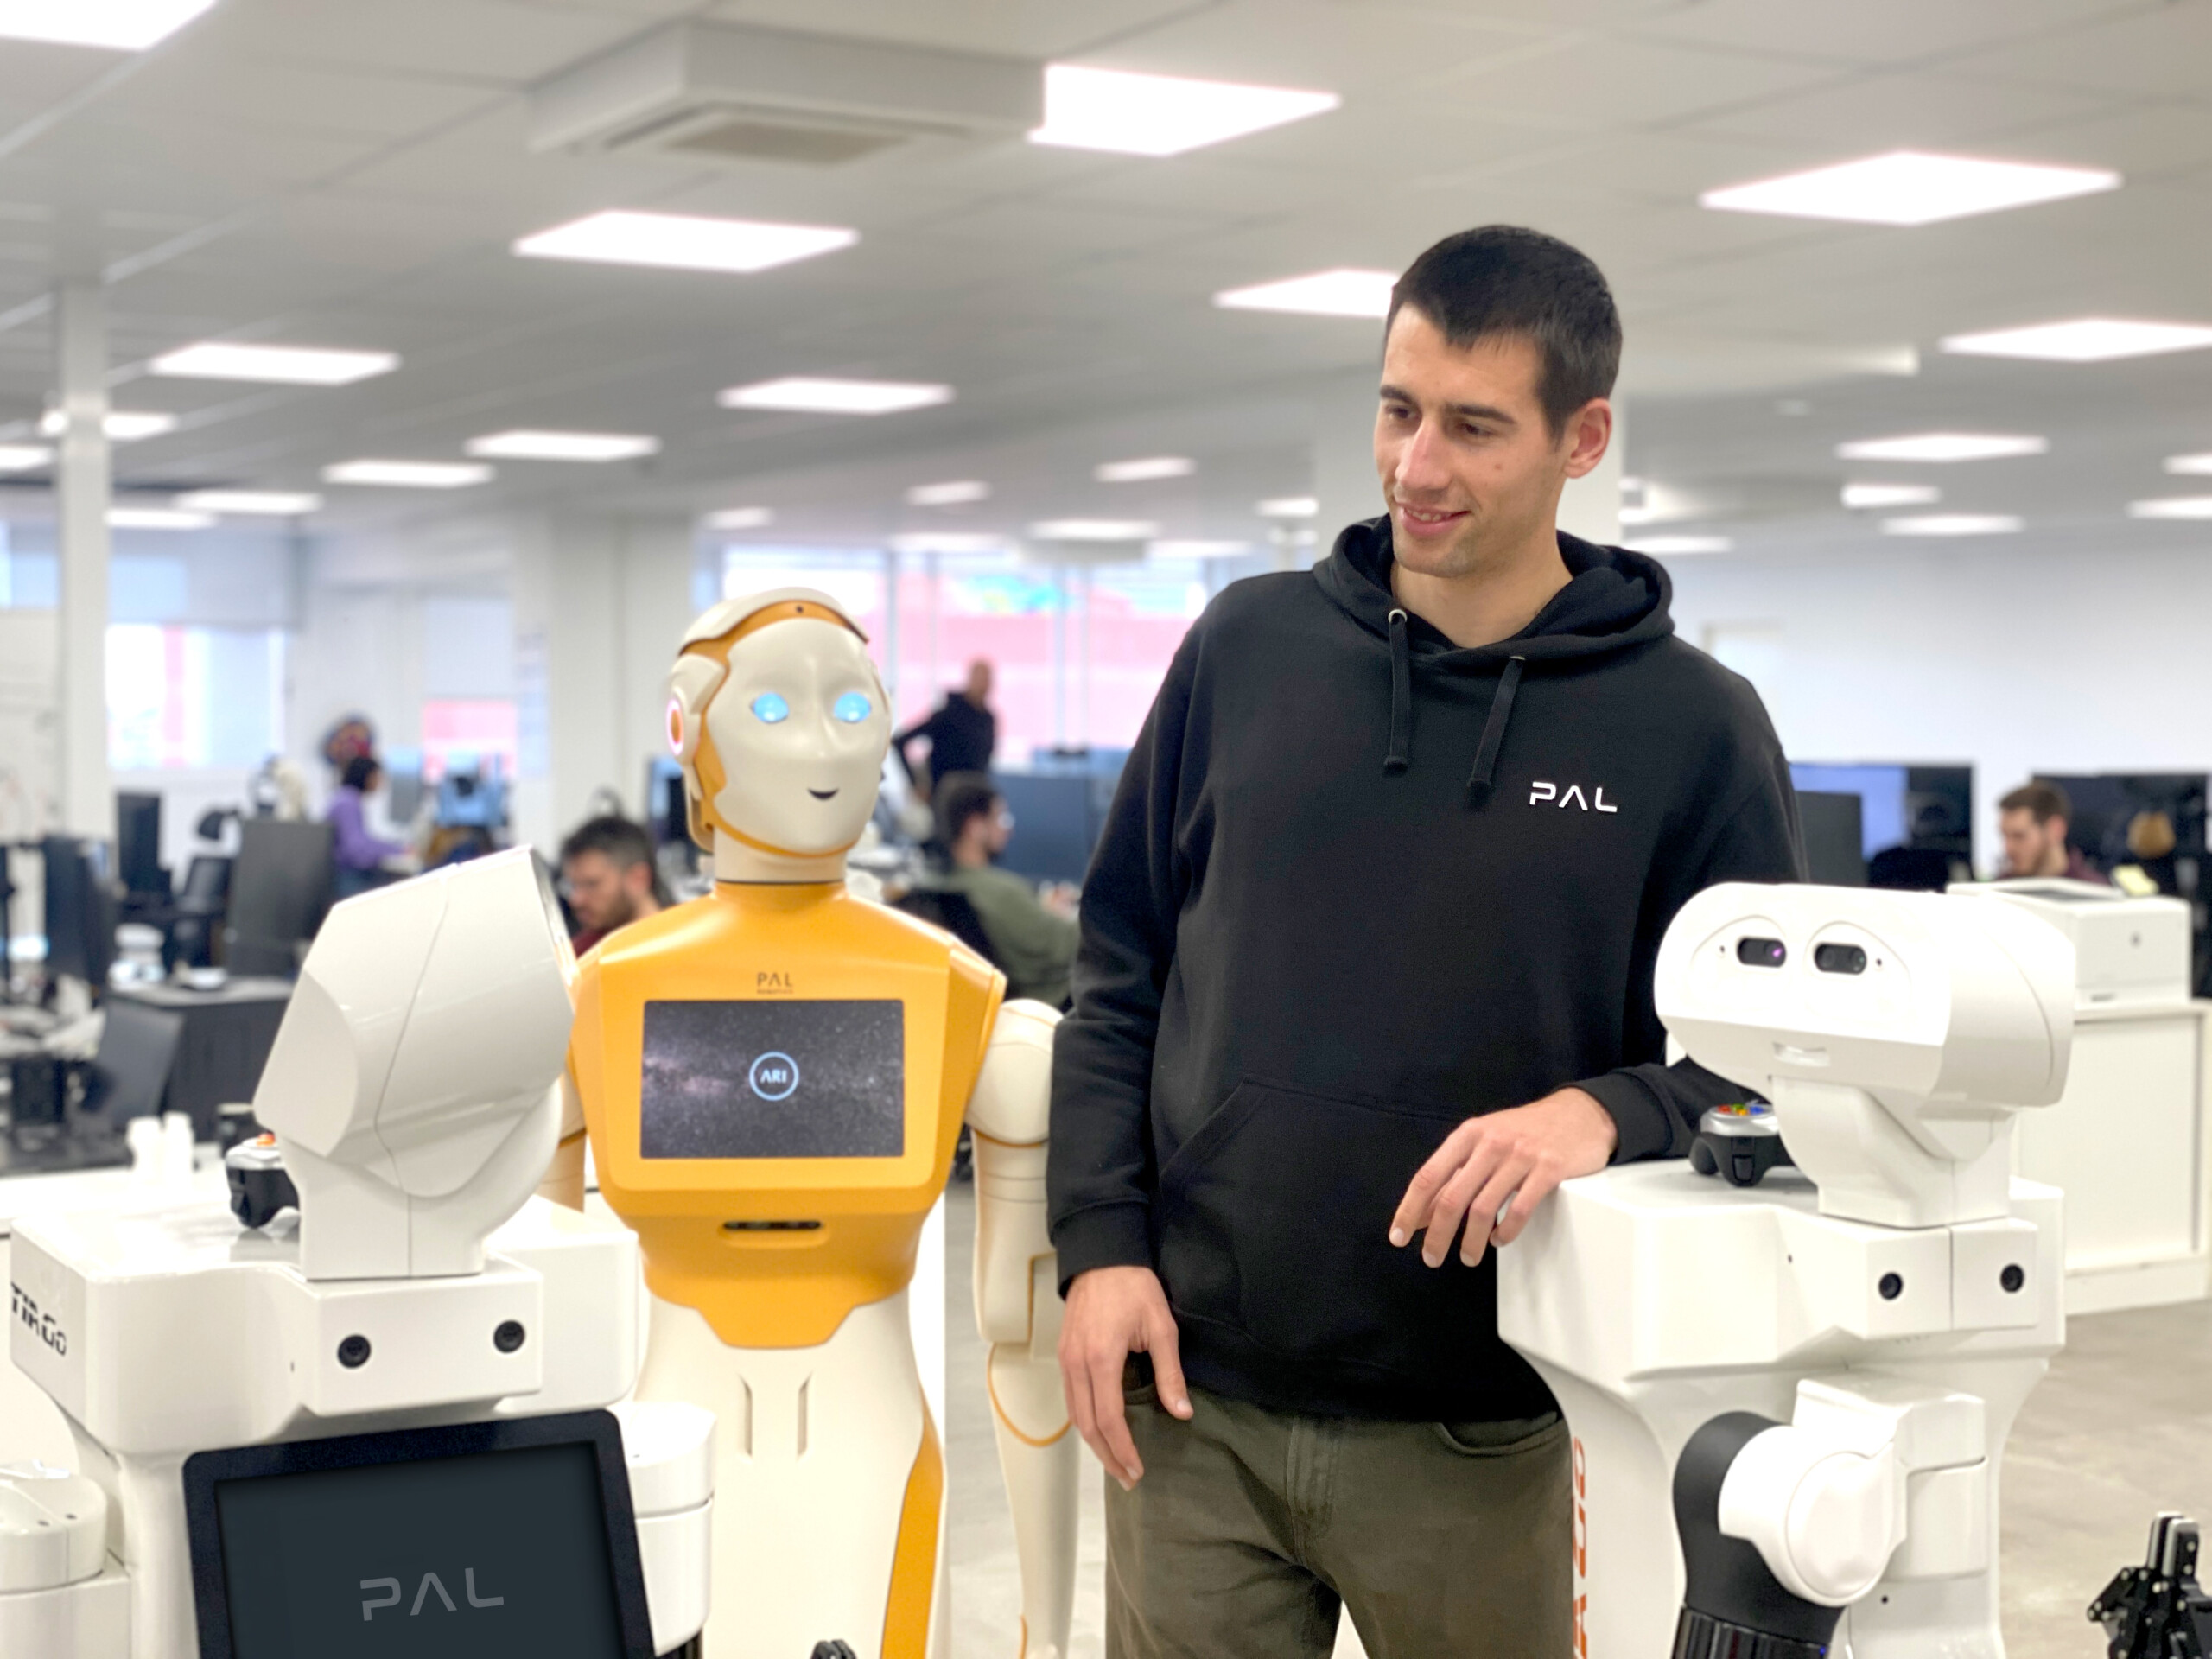 The image depicts Ferran Gebelli interacting with a TIAGo and ARI robots by PAL Robotics. The setting appears to be a busy office or research lab with several individuals at their workstations in the background. The focus is on Ferran and the robot, highlighting a moment of human-robot interaction. 